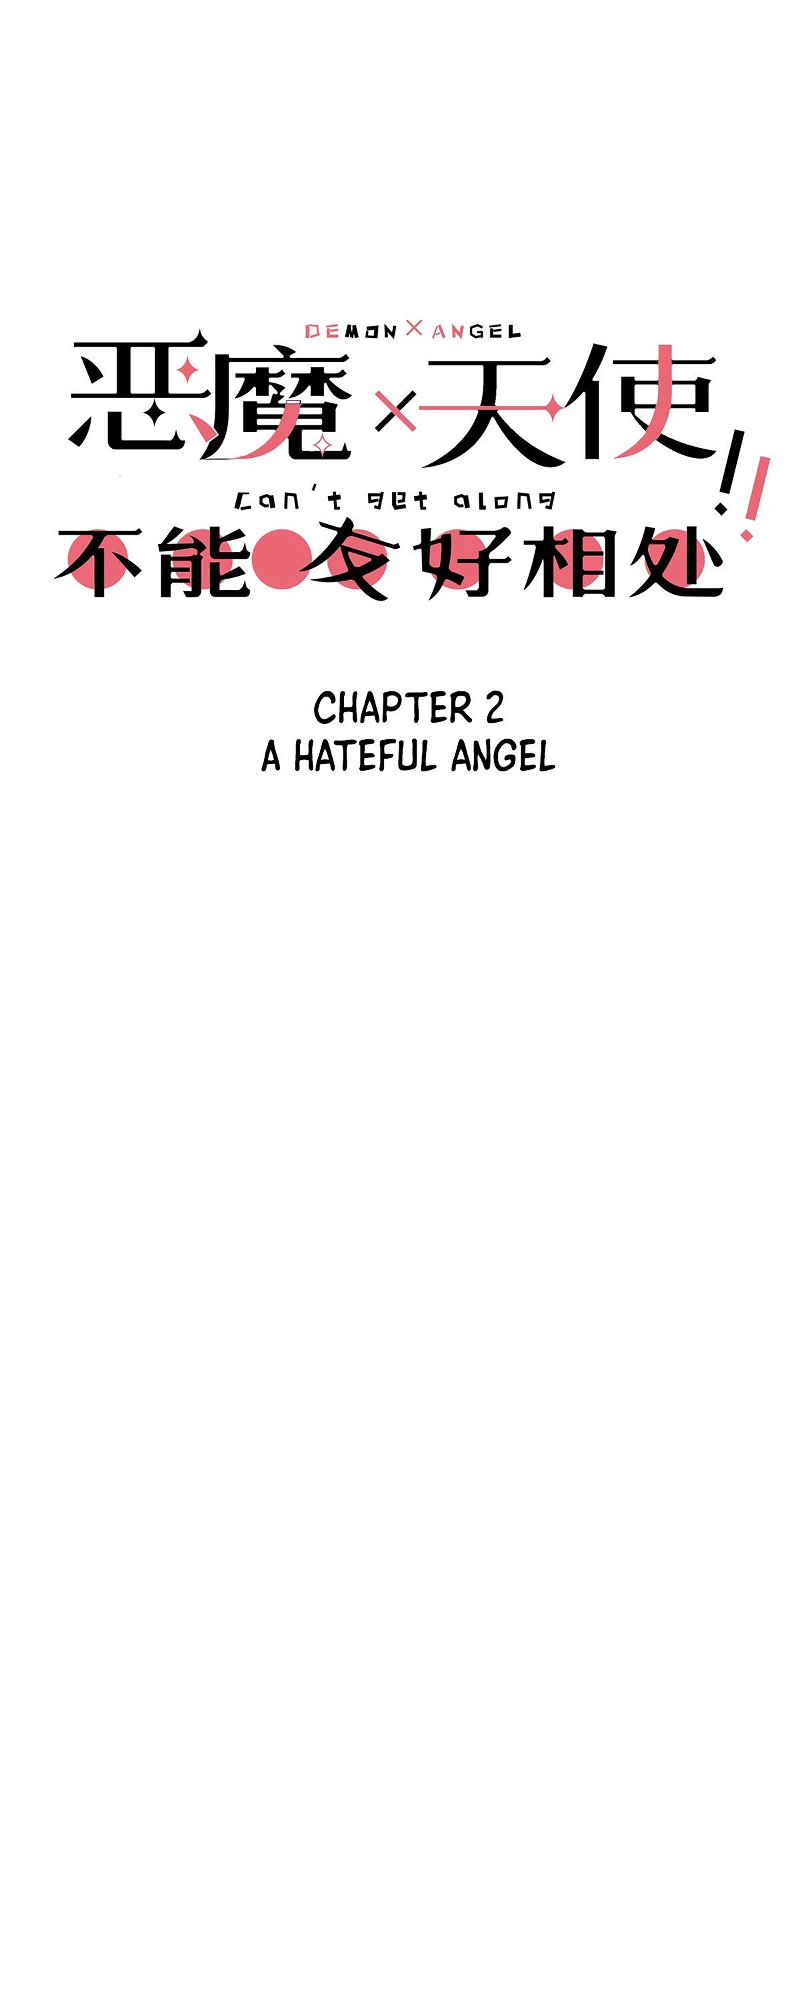 Demon X Angel, Can’t Get Along! Chapter 2 - Page 0